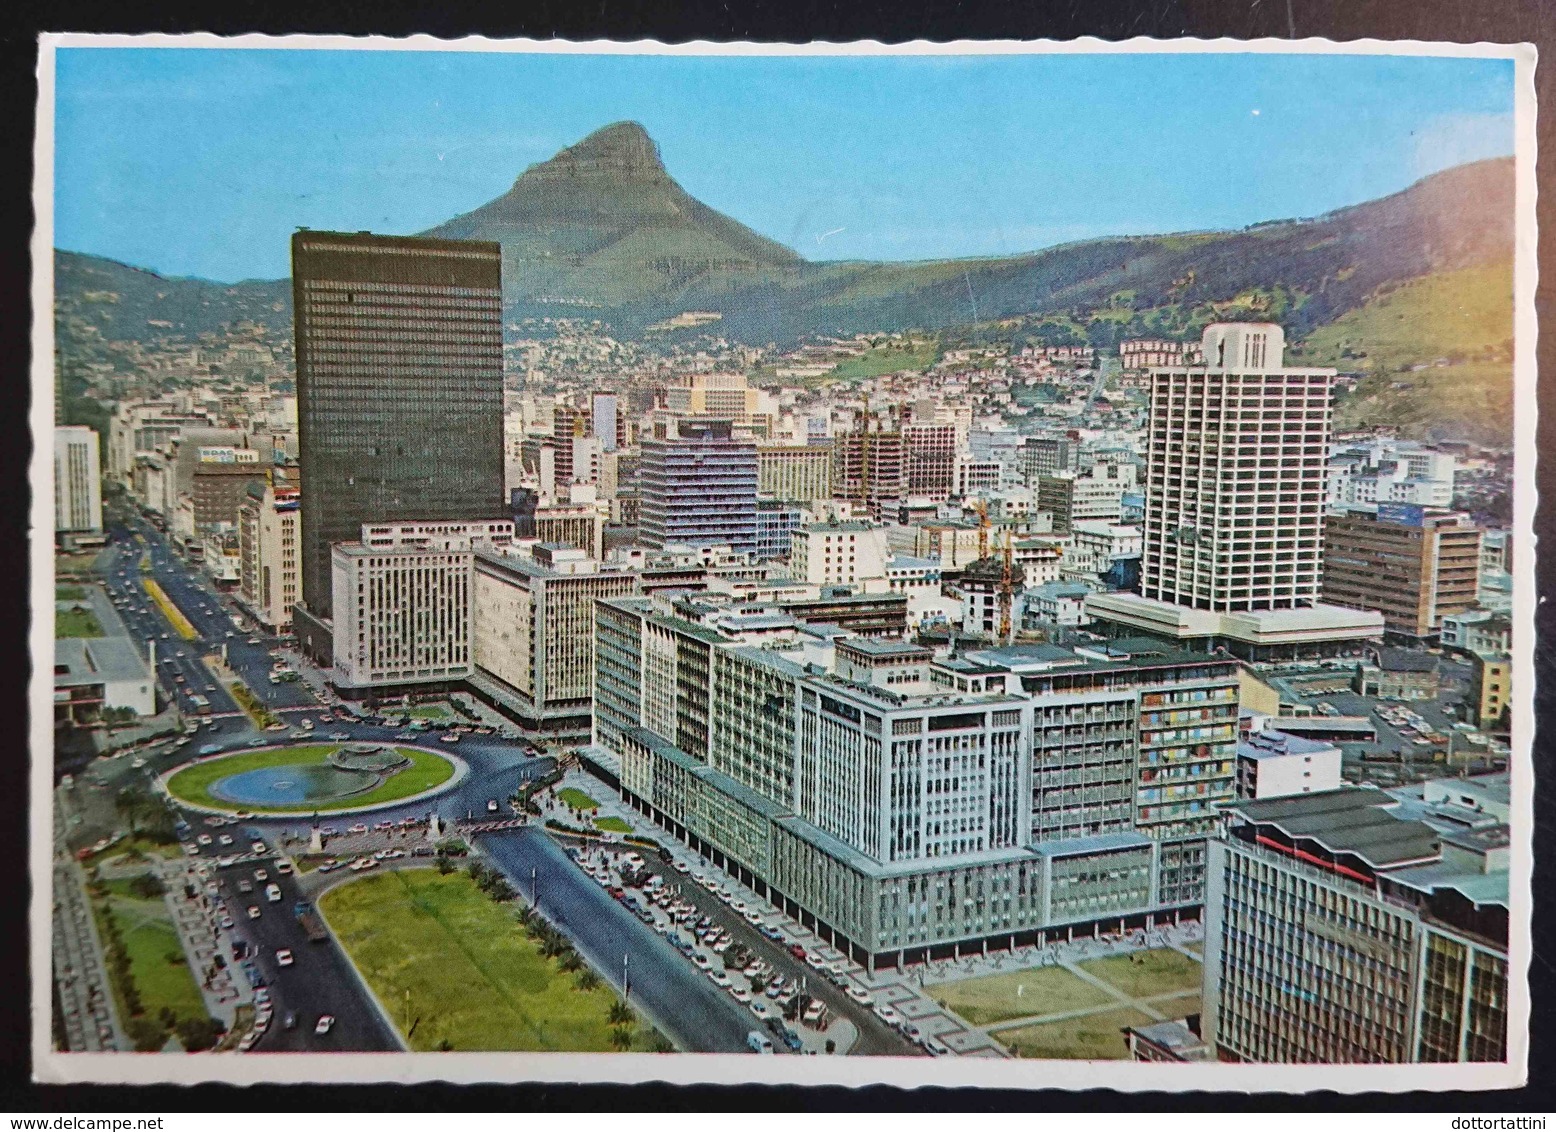 CAPE TOWN / KAAPSTAD - South Africa - An Imposing View Of Adderley Street And City Center -  Vg - Sud Africa